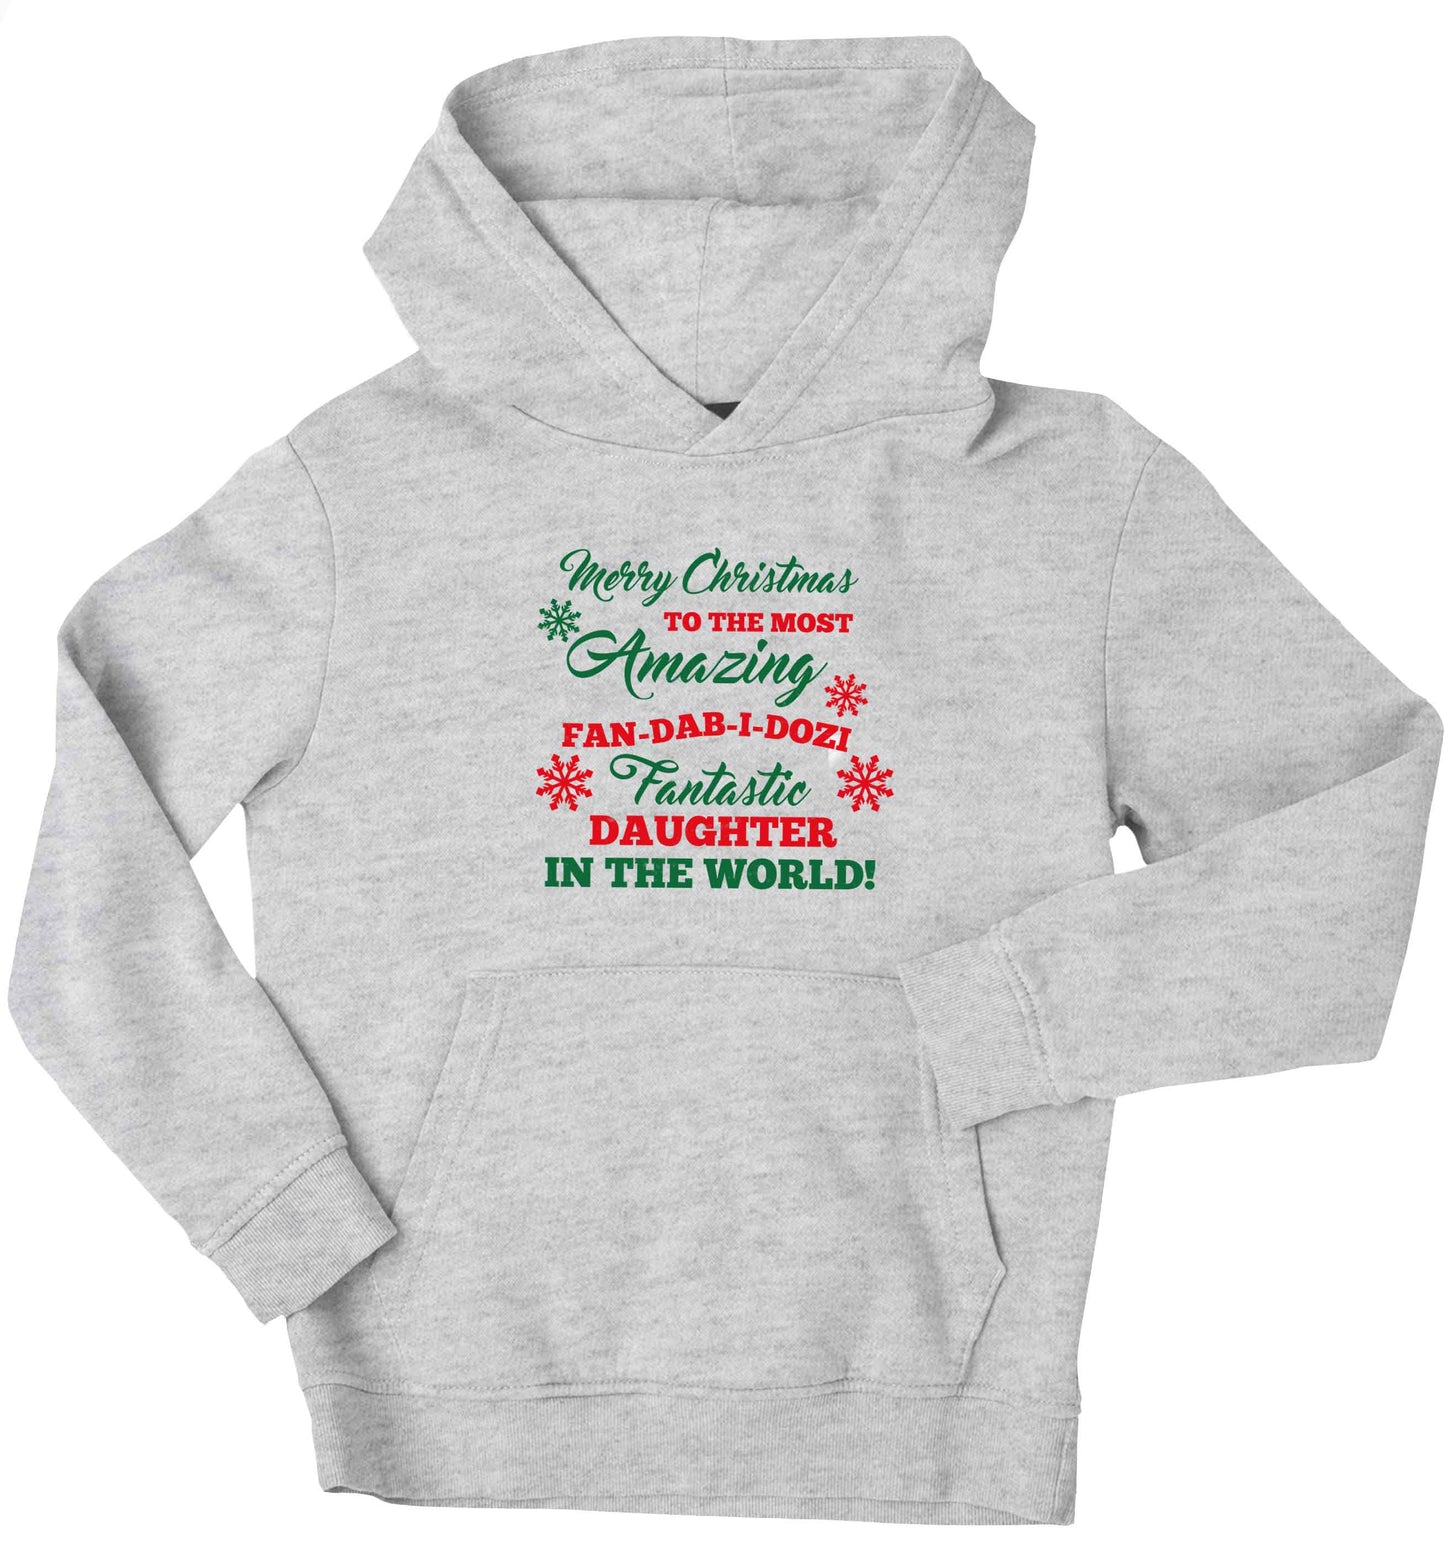 Merry Christmas to the most amazing fan-dab-i-dozi fantasic Daughter in the world children's grey hoodie 12-13 Years